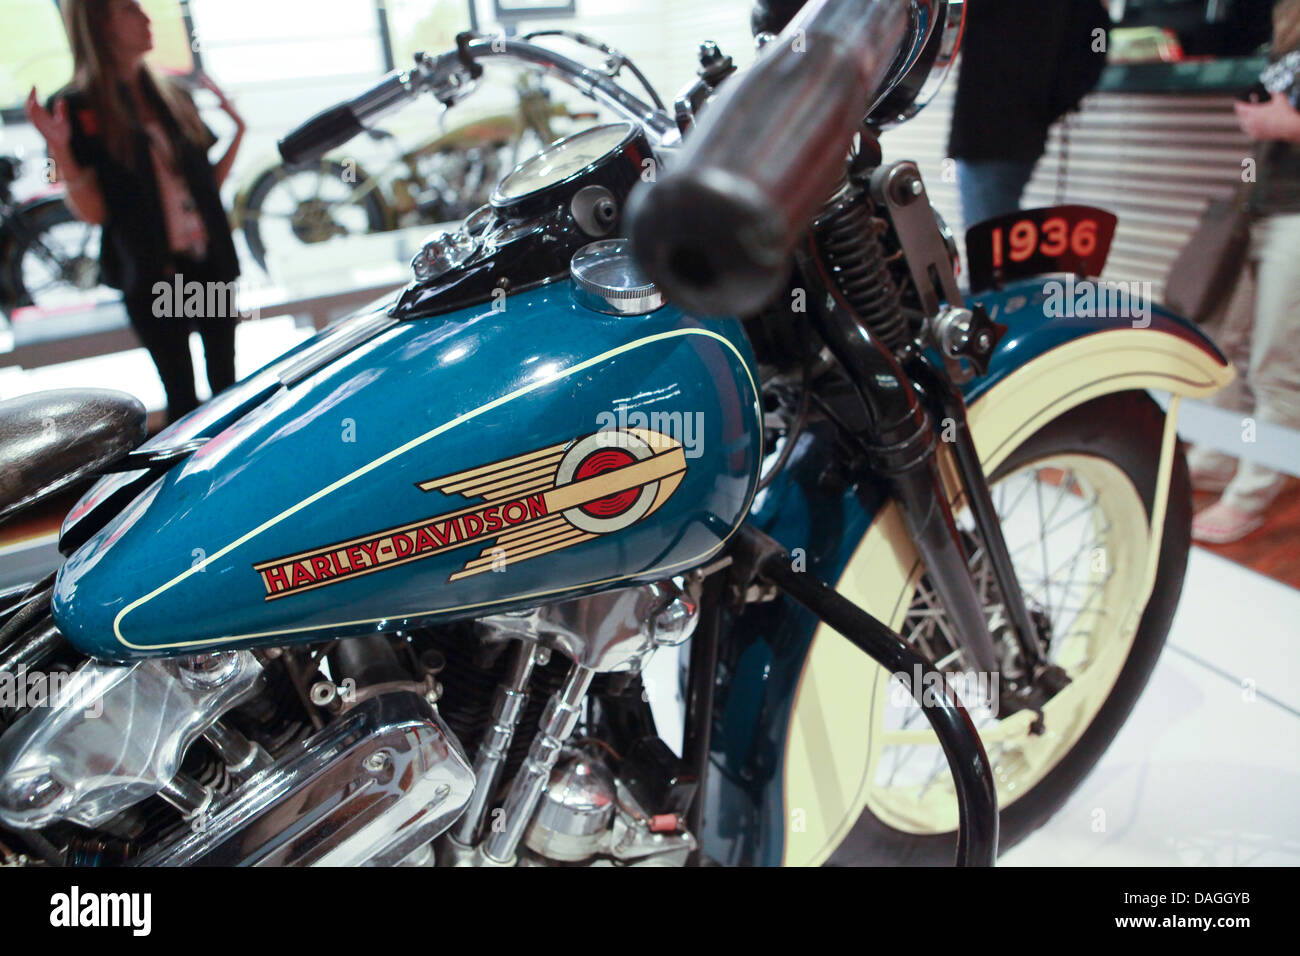 A 1936 Harley-Davidson motorcycle is seen on display at the Harley-Davidson museum in Milwaukee Stock Photo